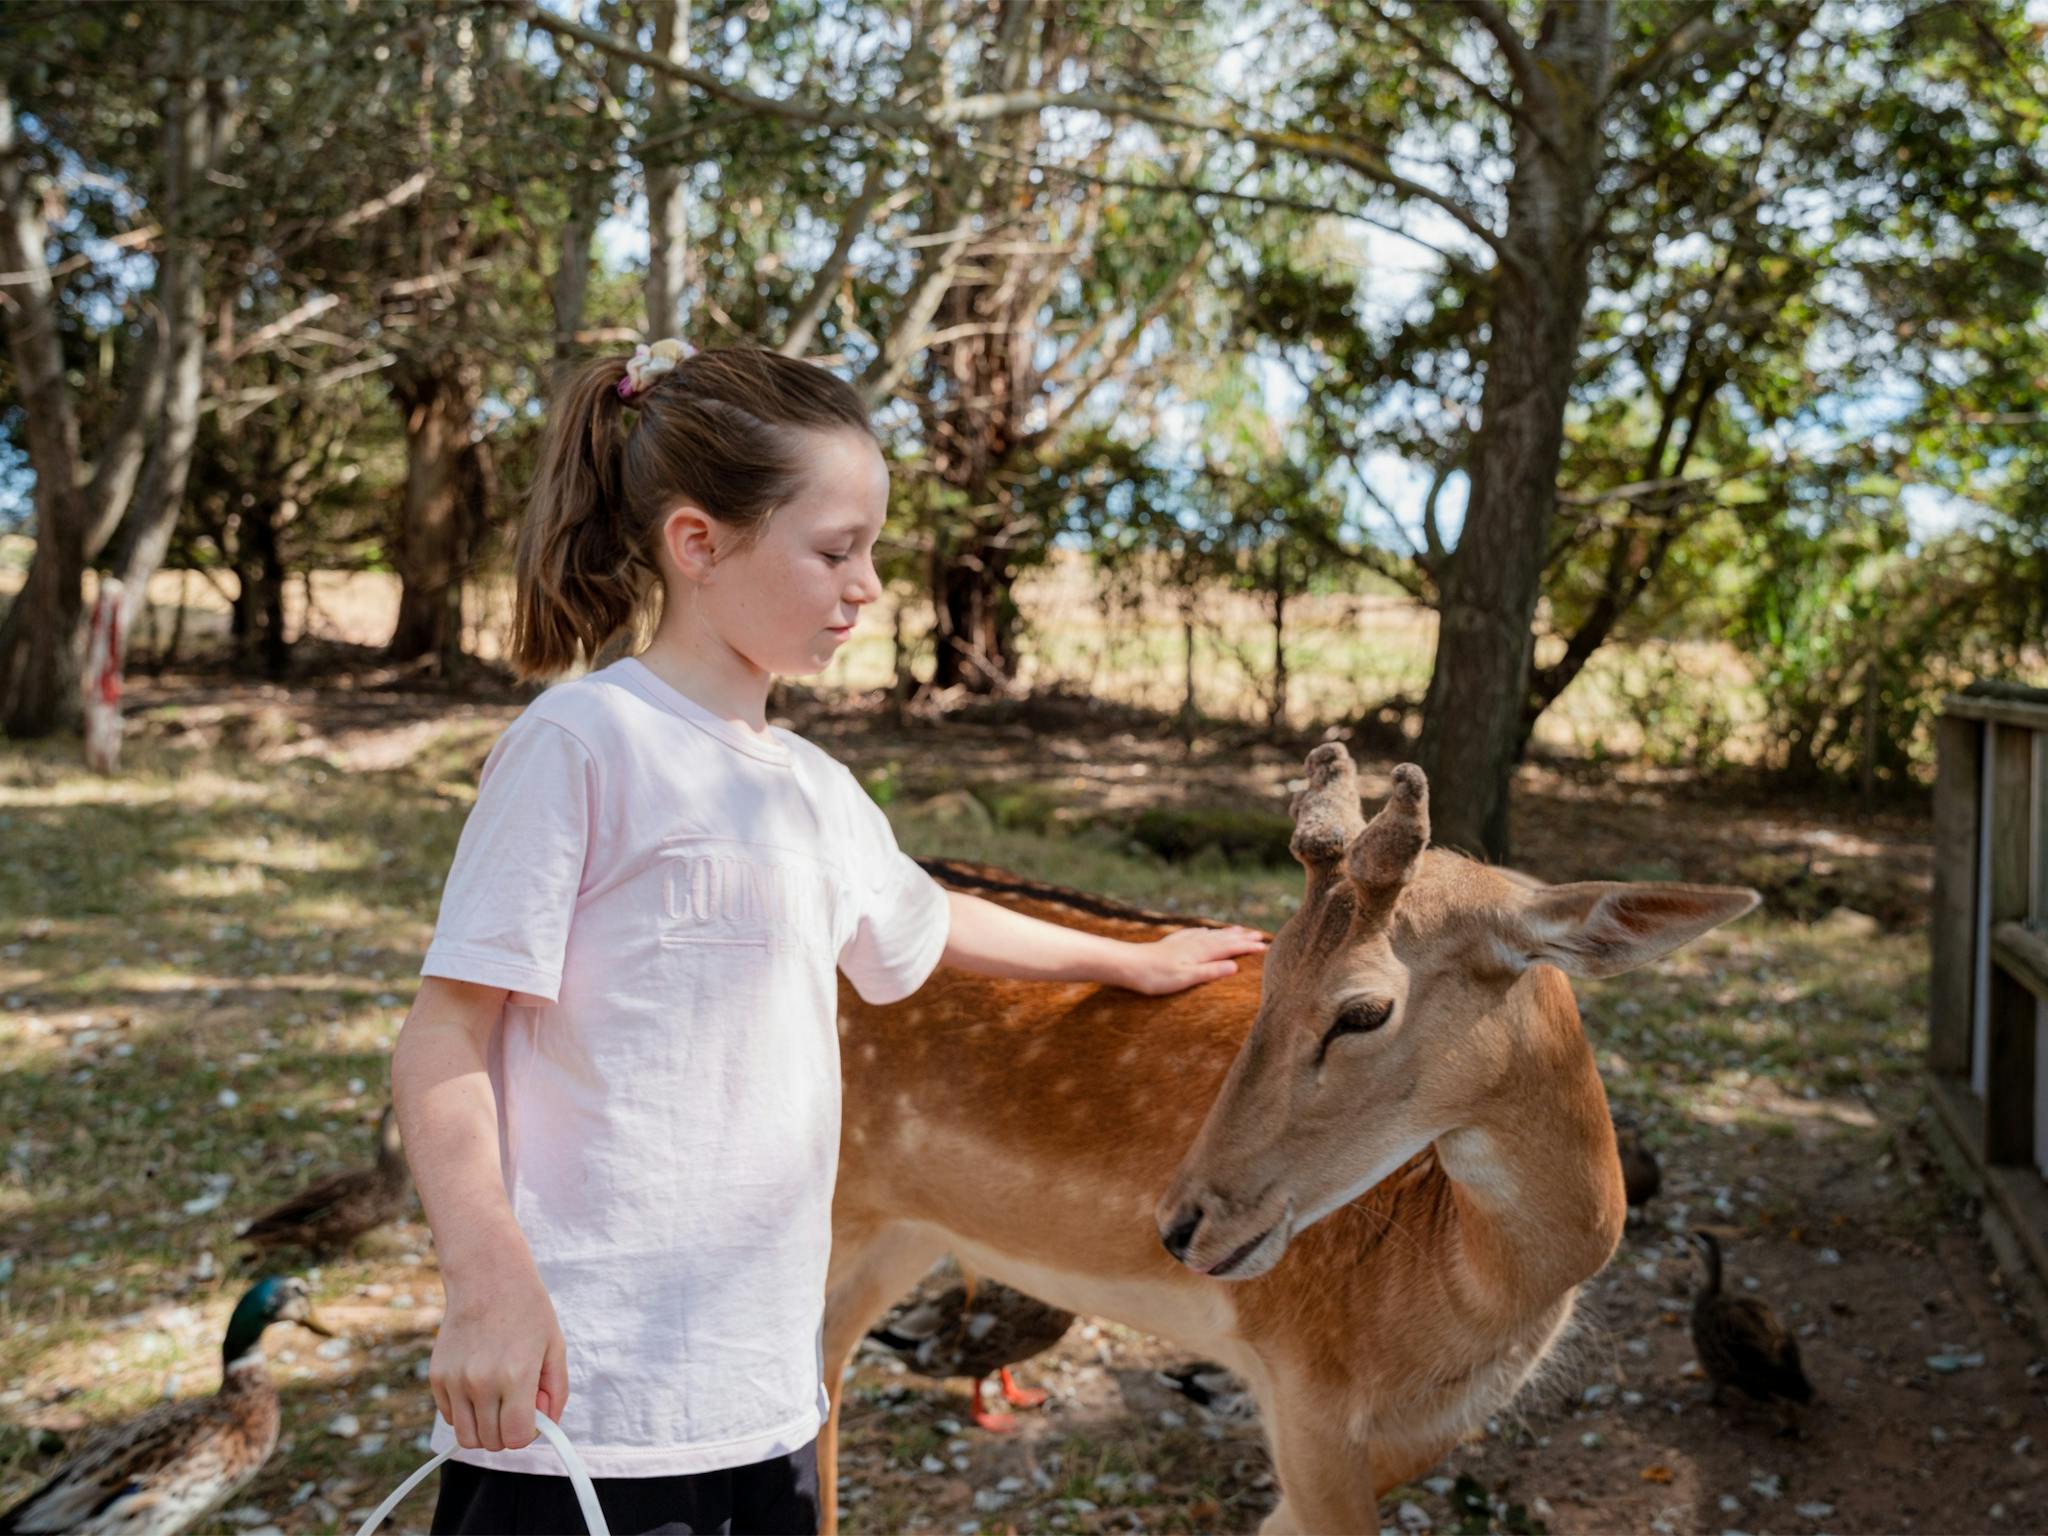 Girl petting the deer at Mansfield Zoo